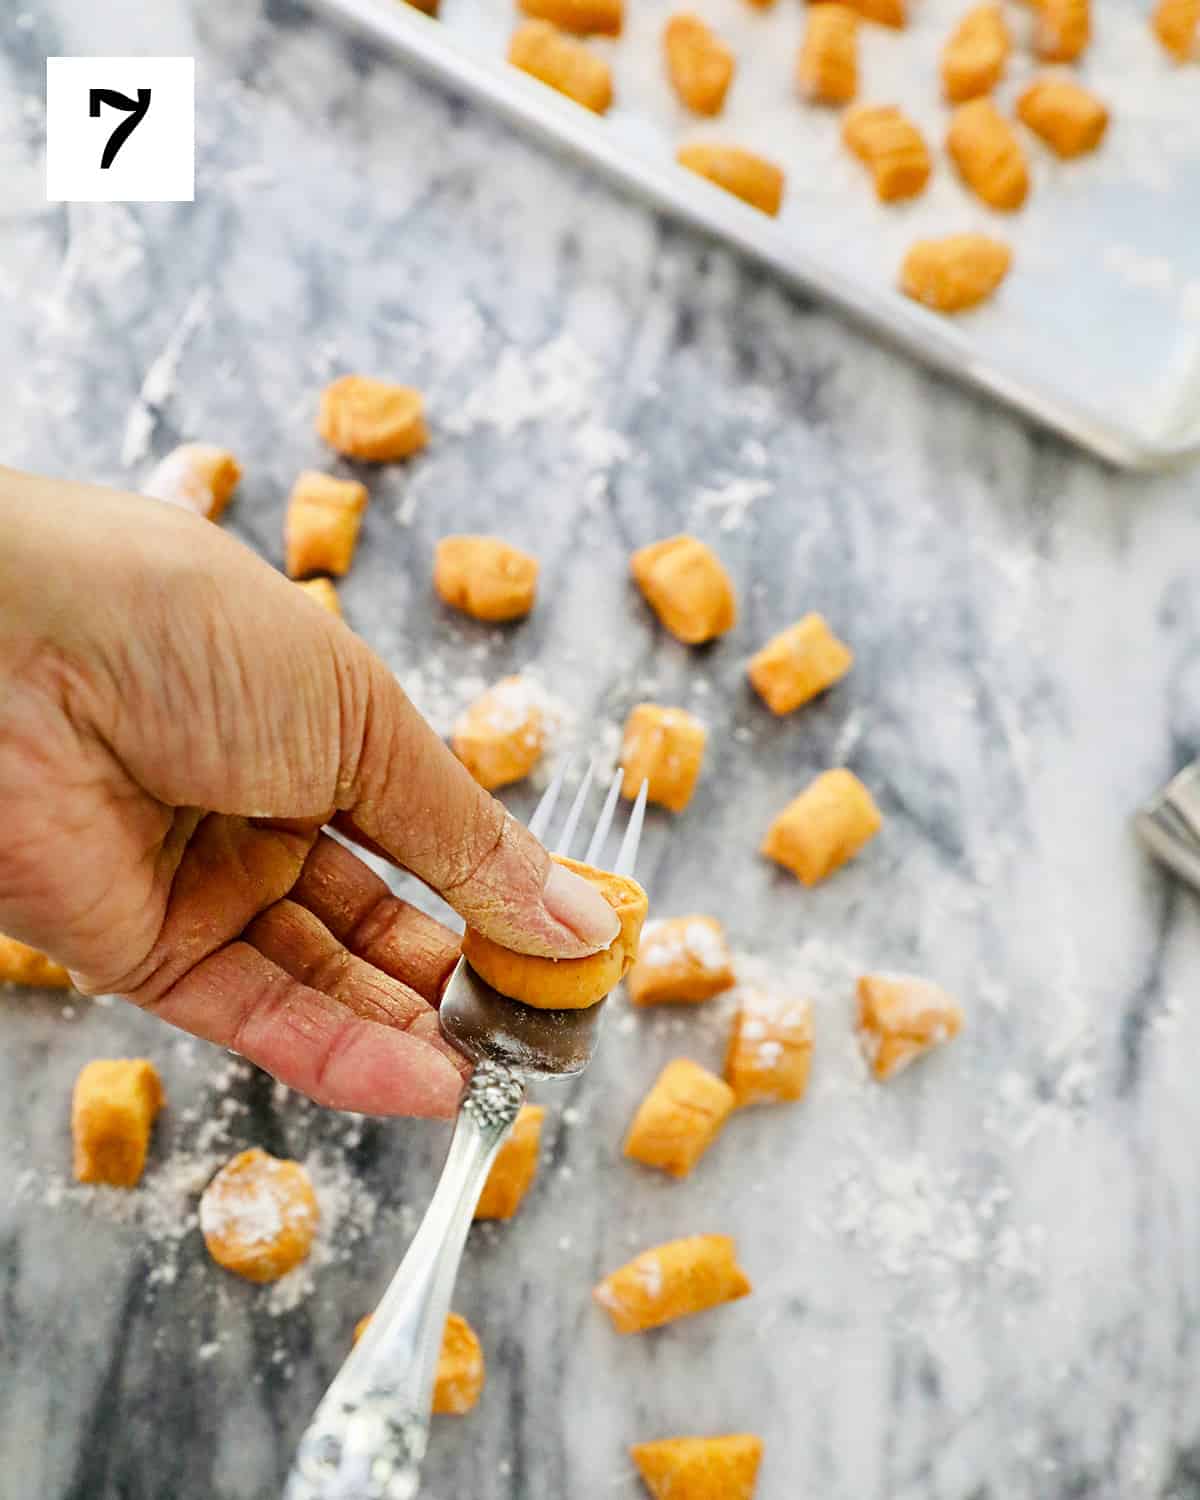 shaping pumpkin gnocchi with a fork over marble countertop.